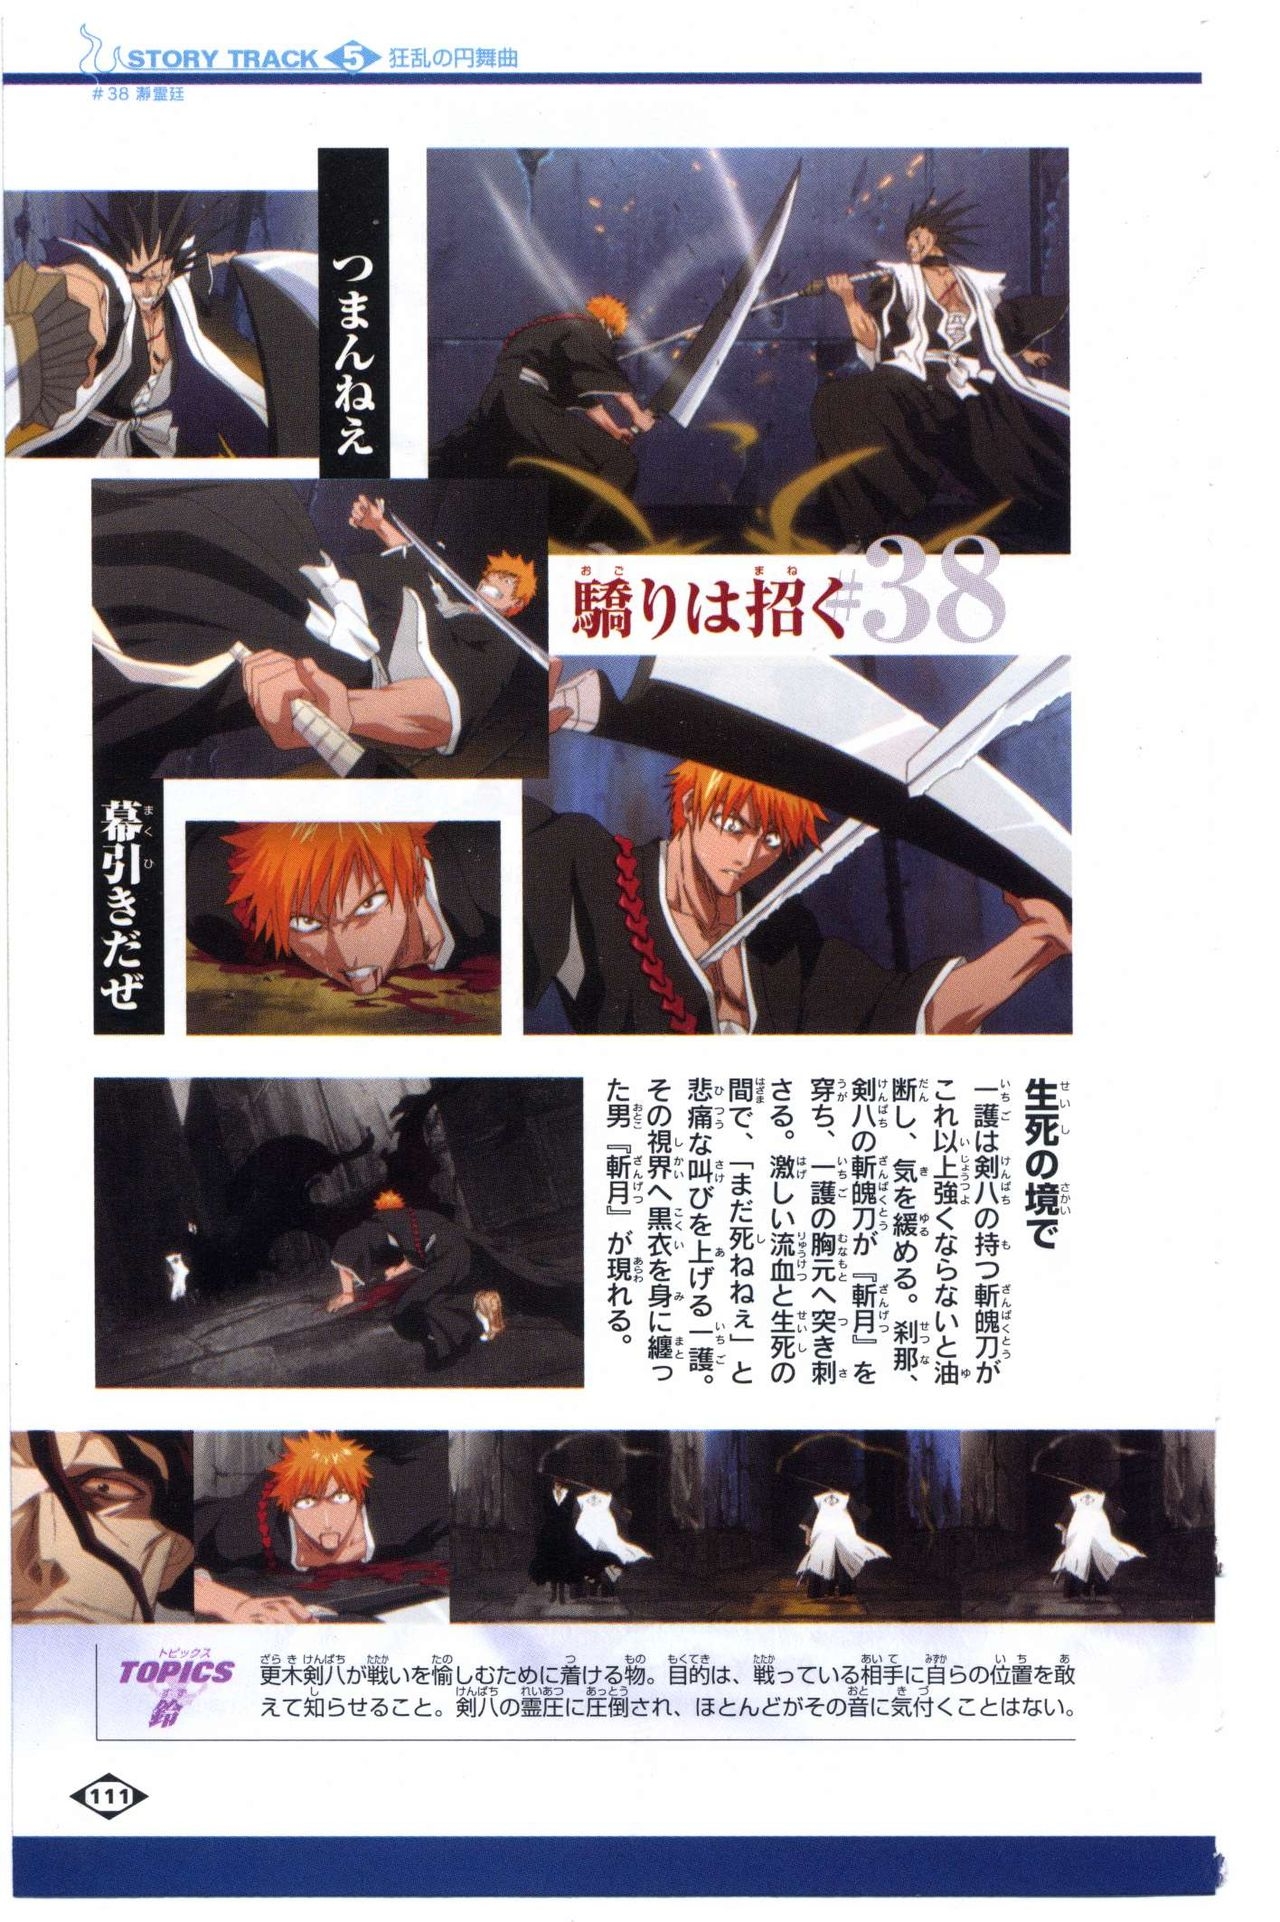 Bleach: Official Animation Book VIBEs 111